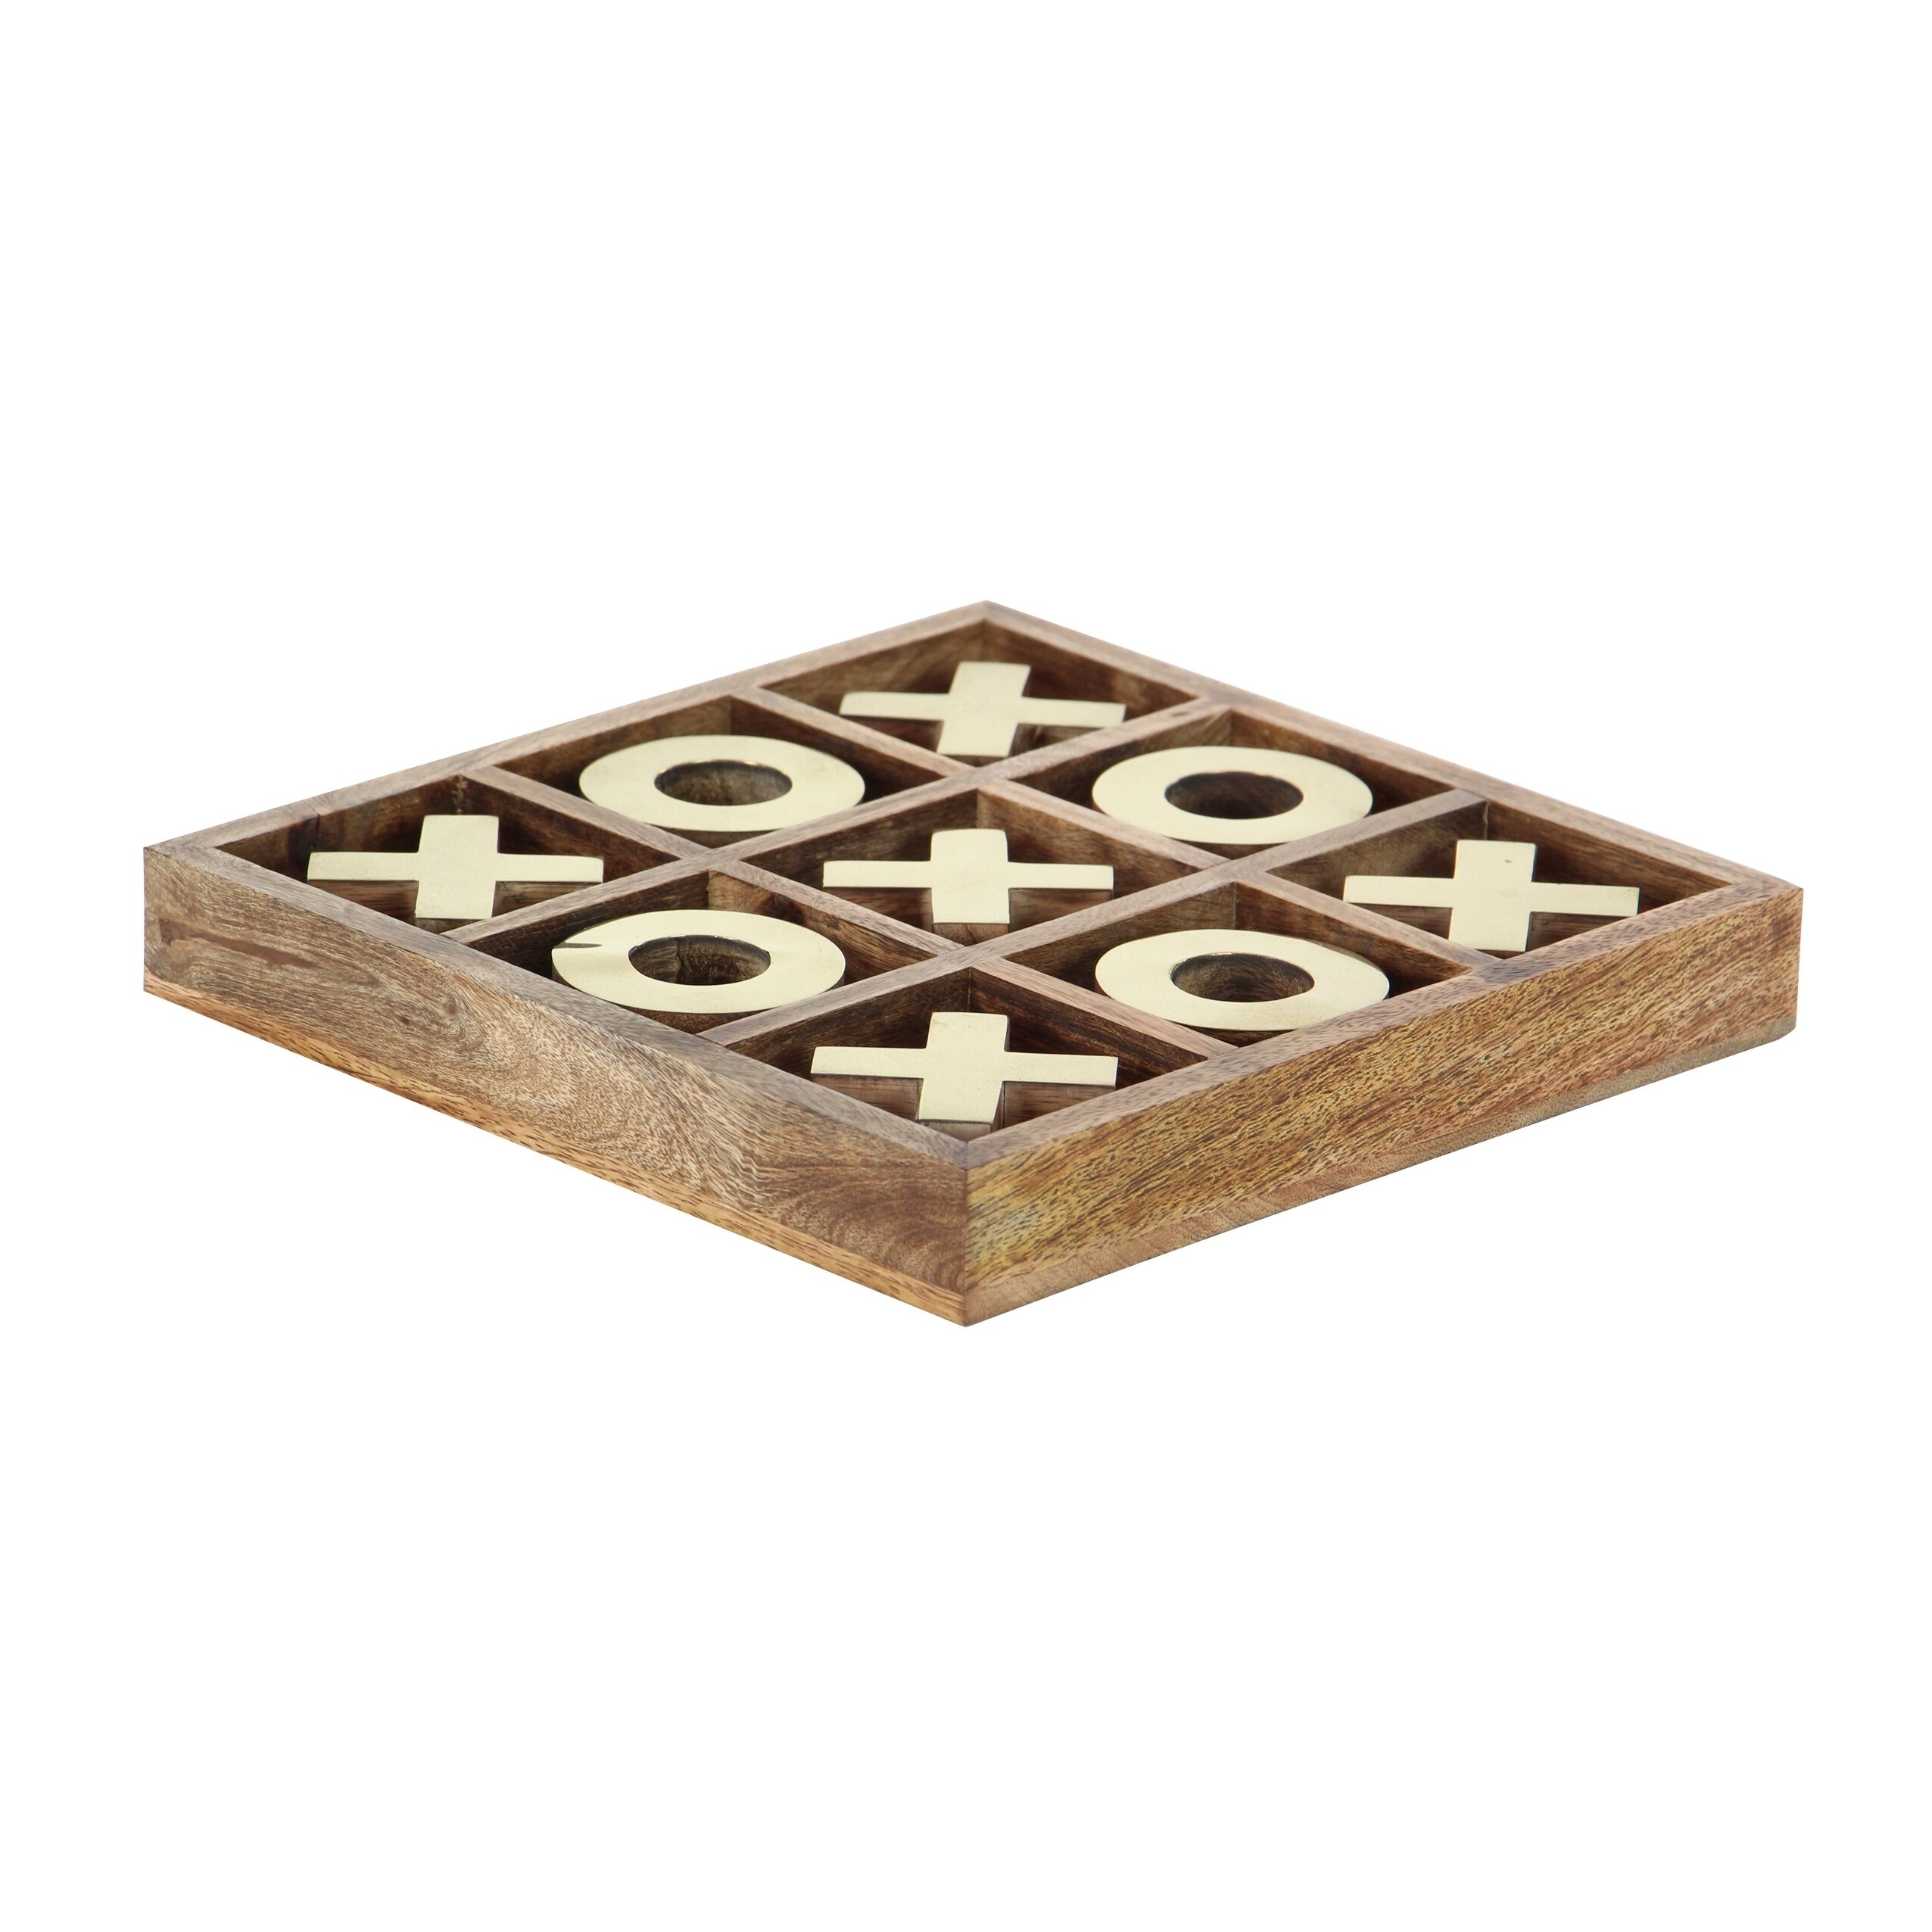 6.5x6.5 in Handmade Rusticity Wood and Brass Tic Tac Toe Game 